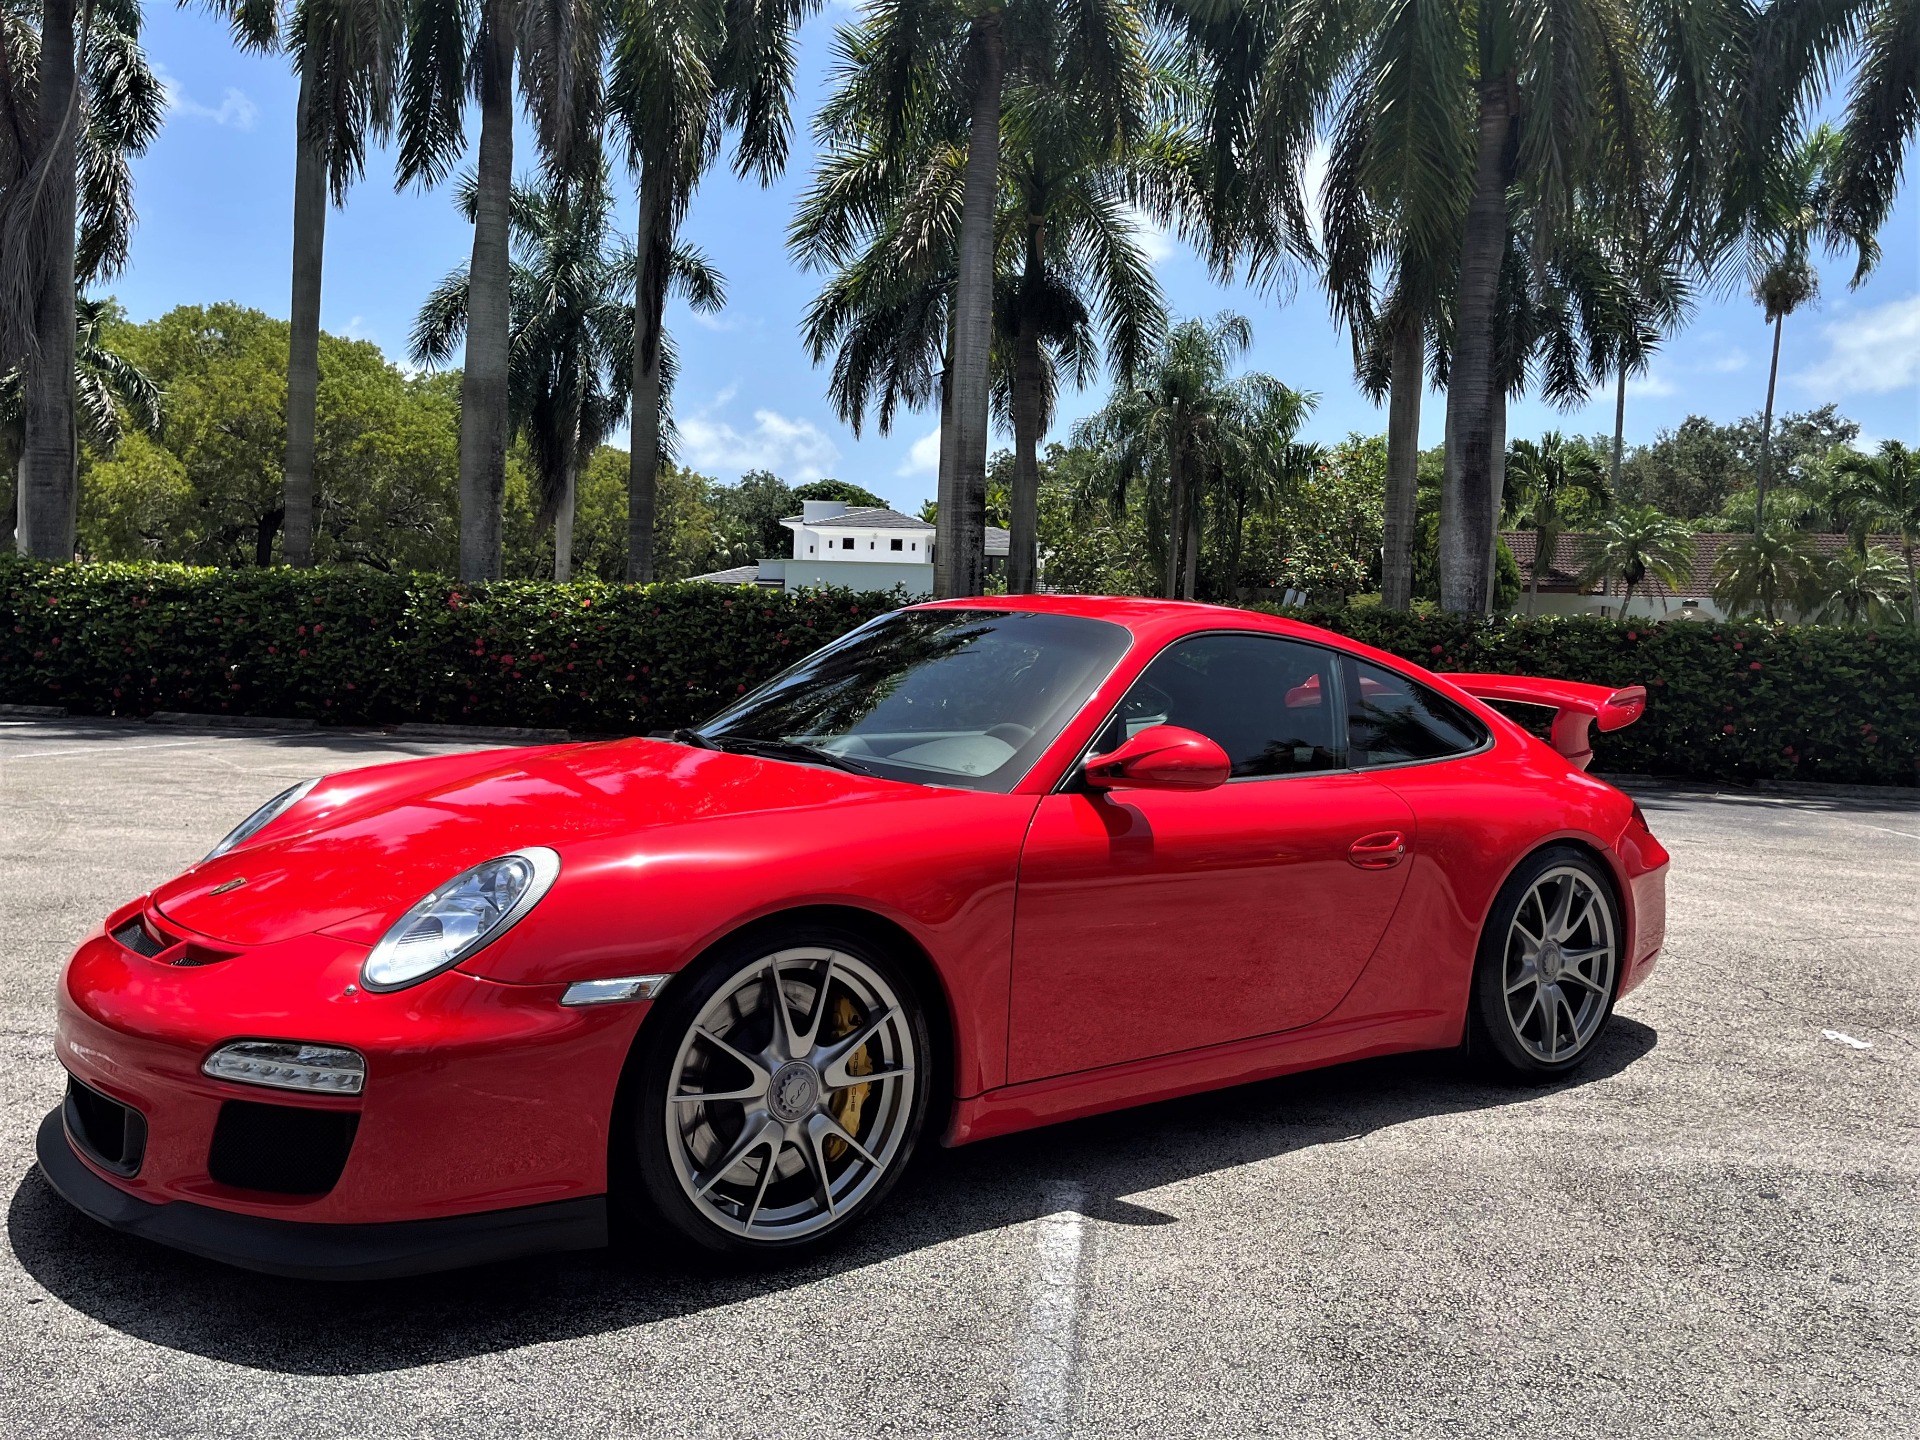 Used 2010 Porsche 911 GT3 for sale $179,850 at The Gables Sports Cars in Miami FL 33146 3